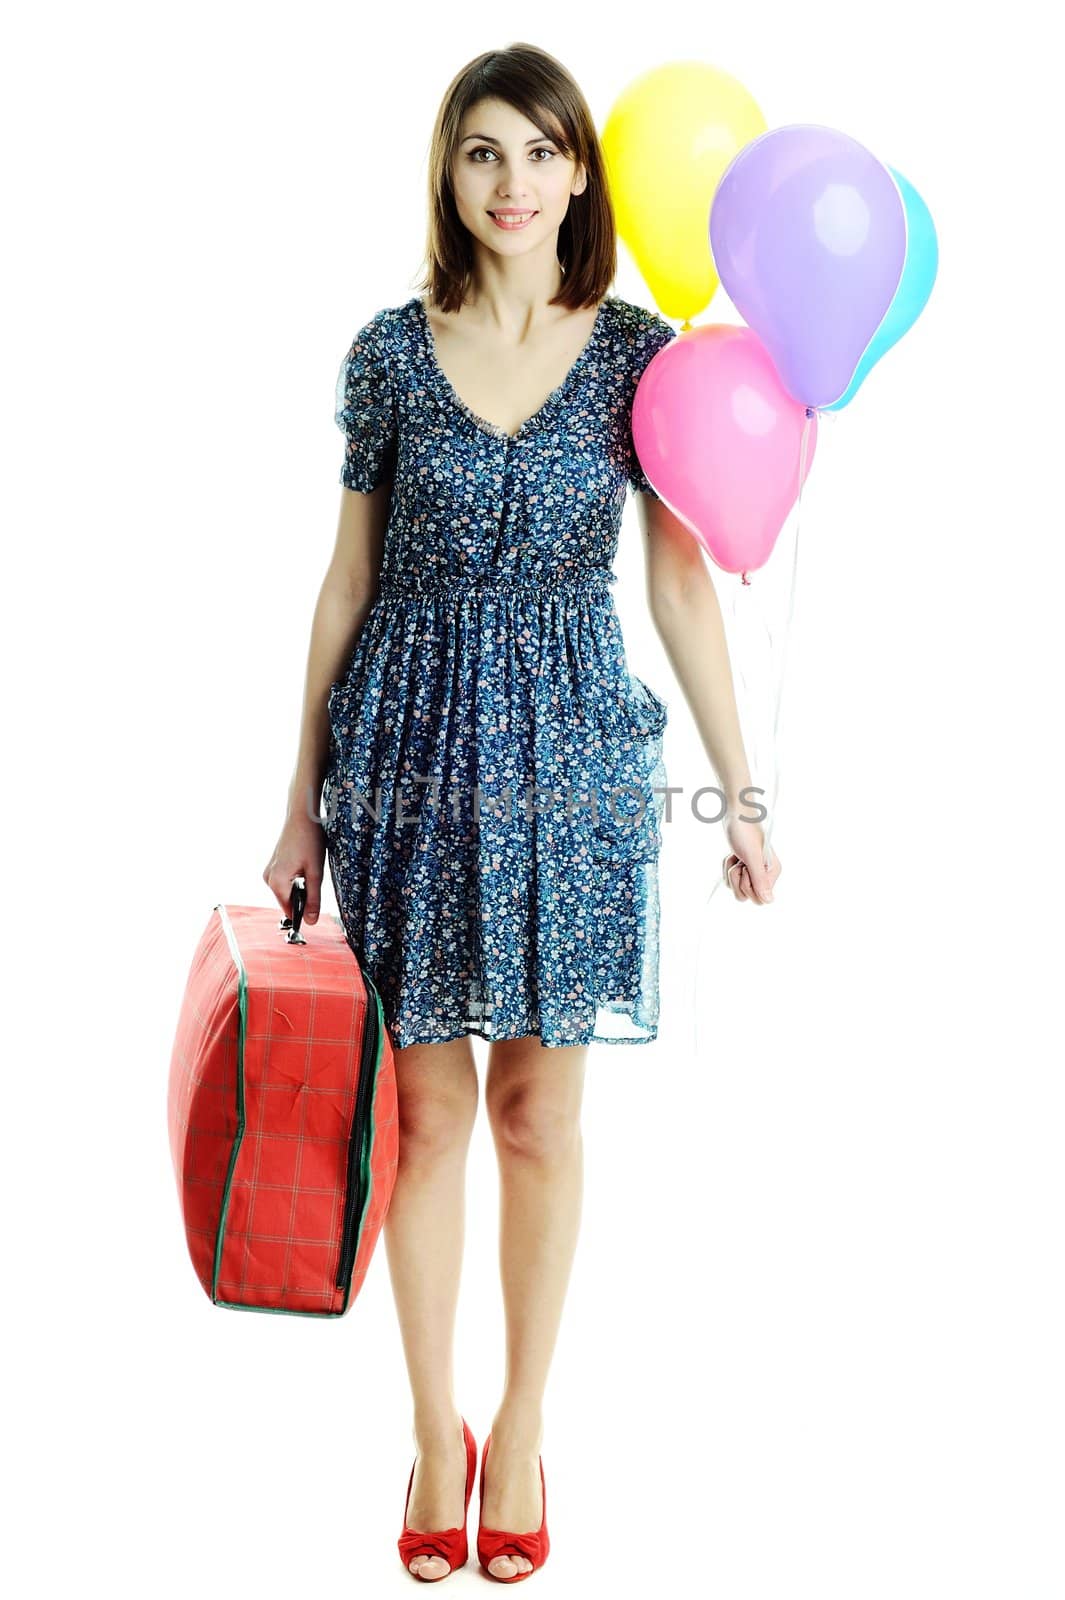 A young beautiful woman with balloons and a bag